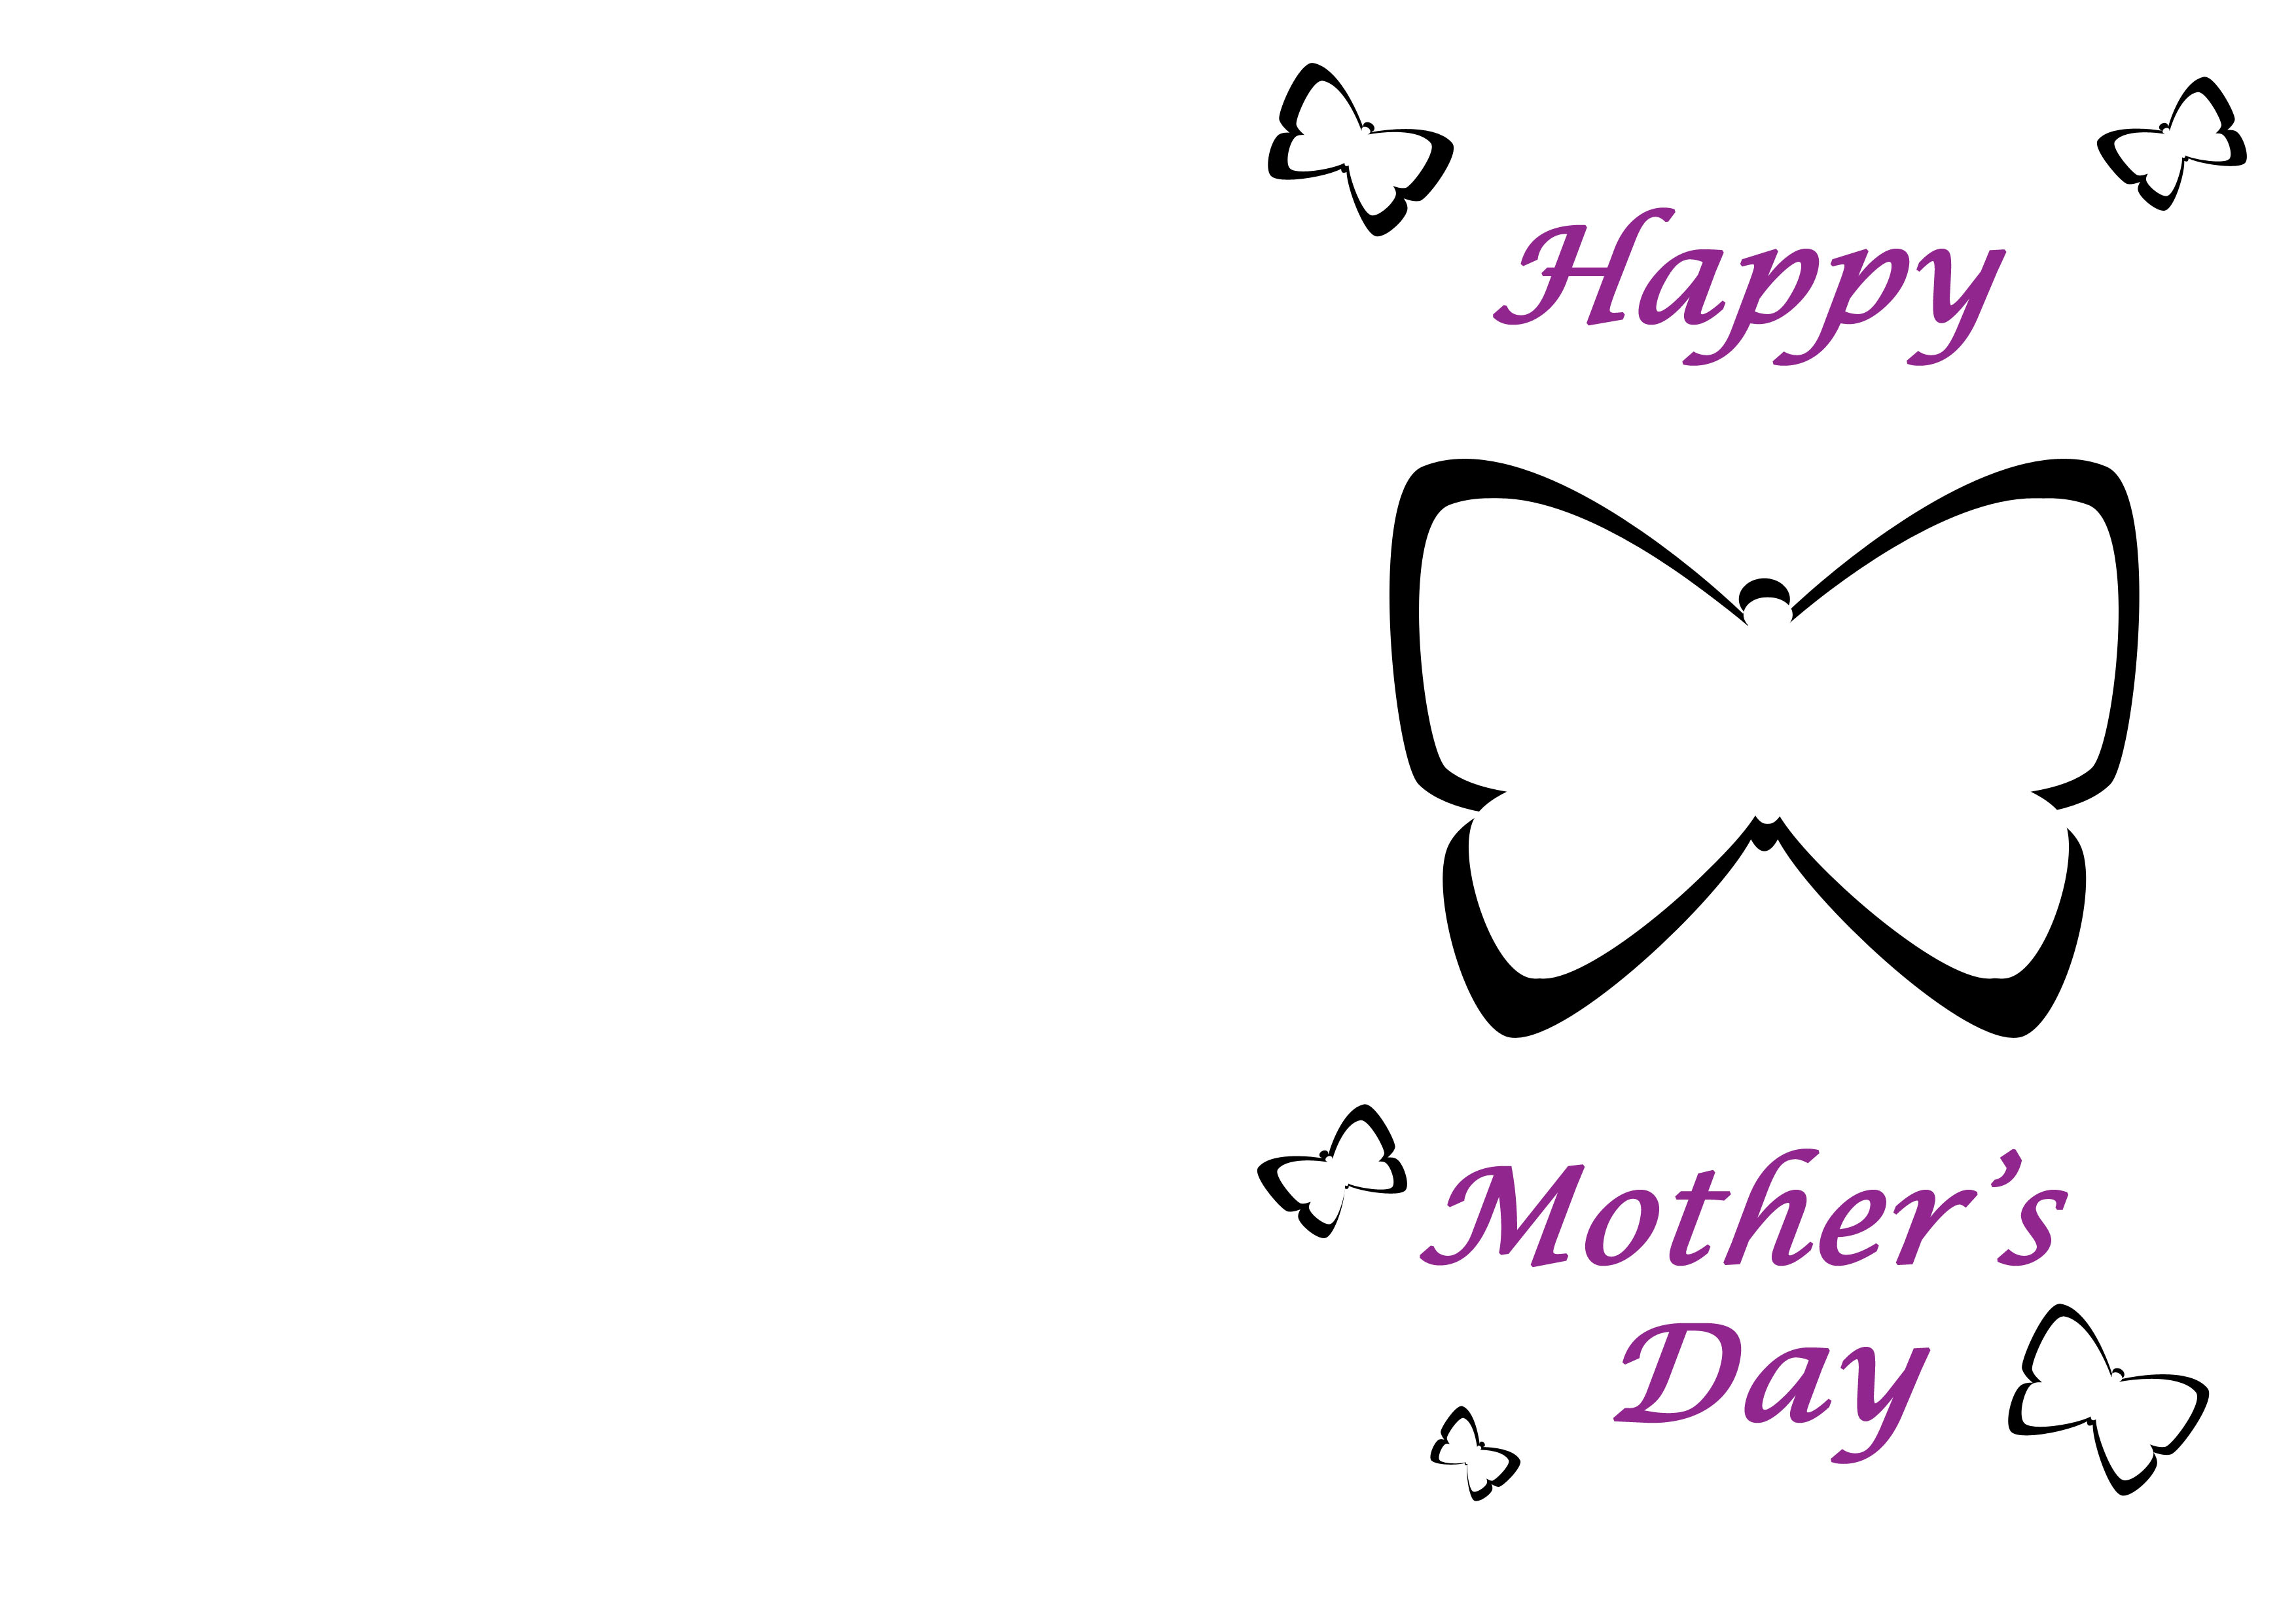 microsoft-templates-mothers-day-cards-clipart-best